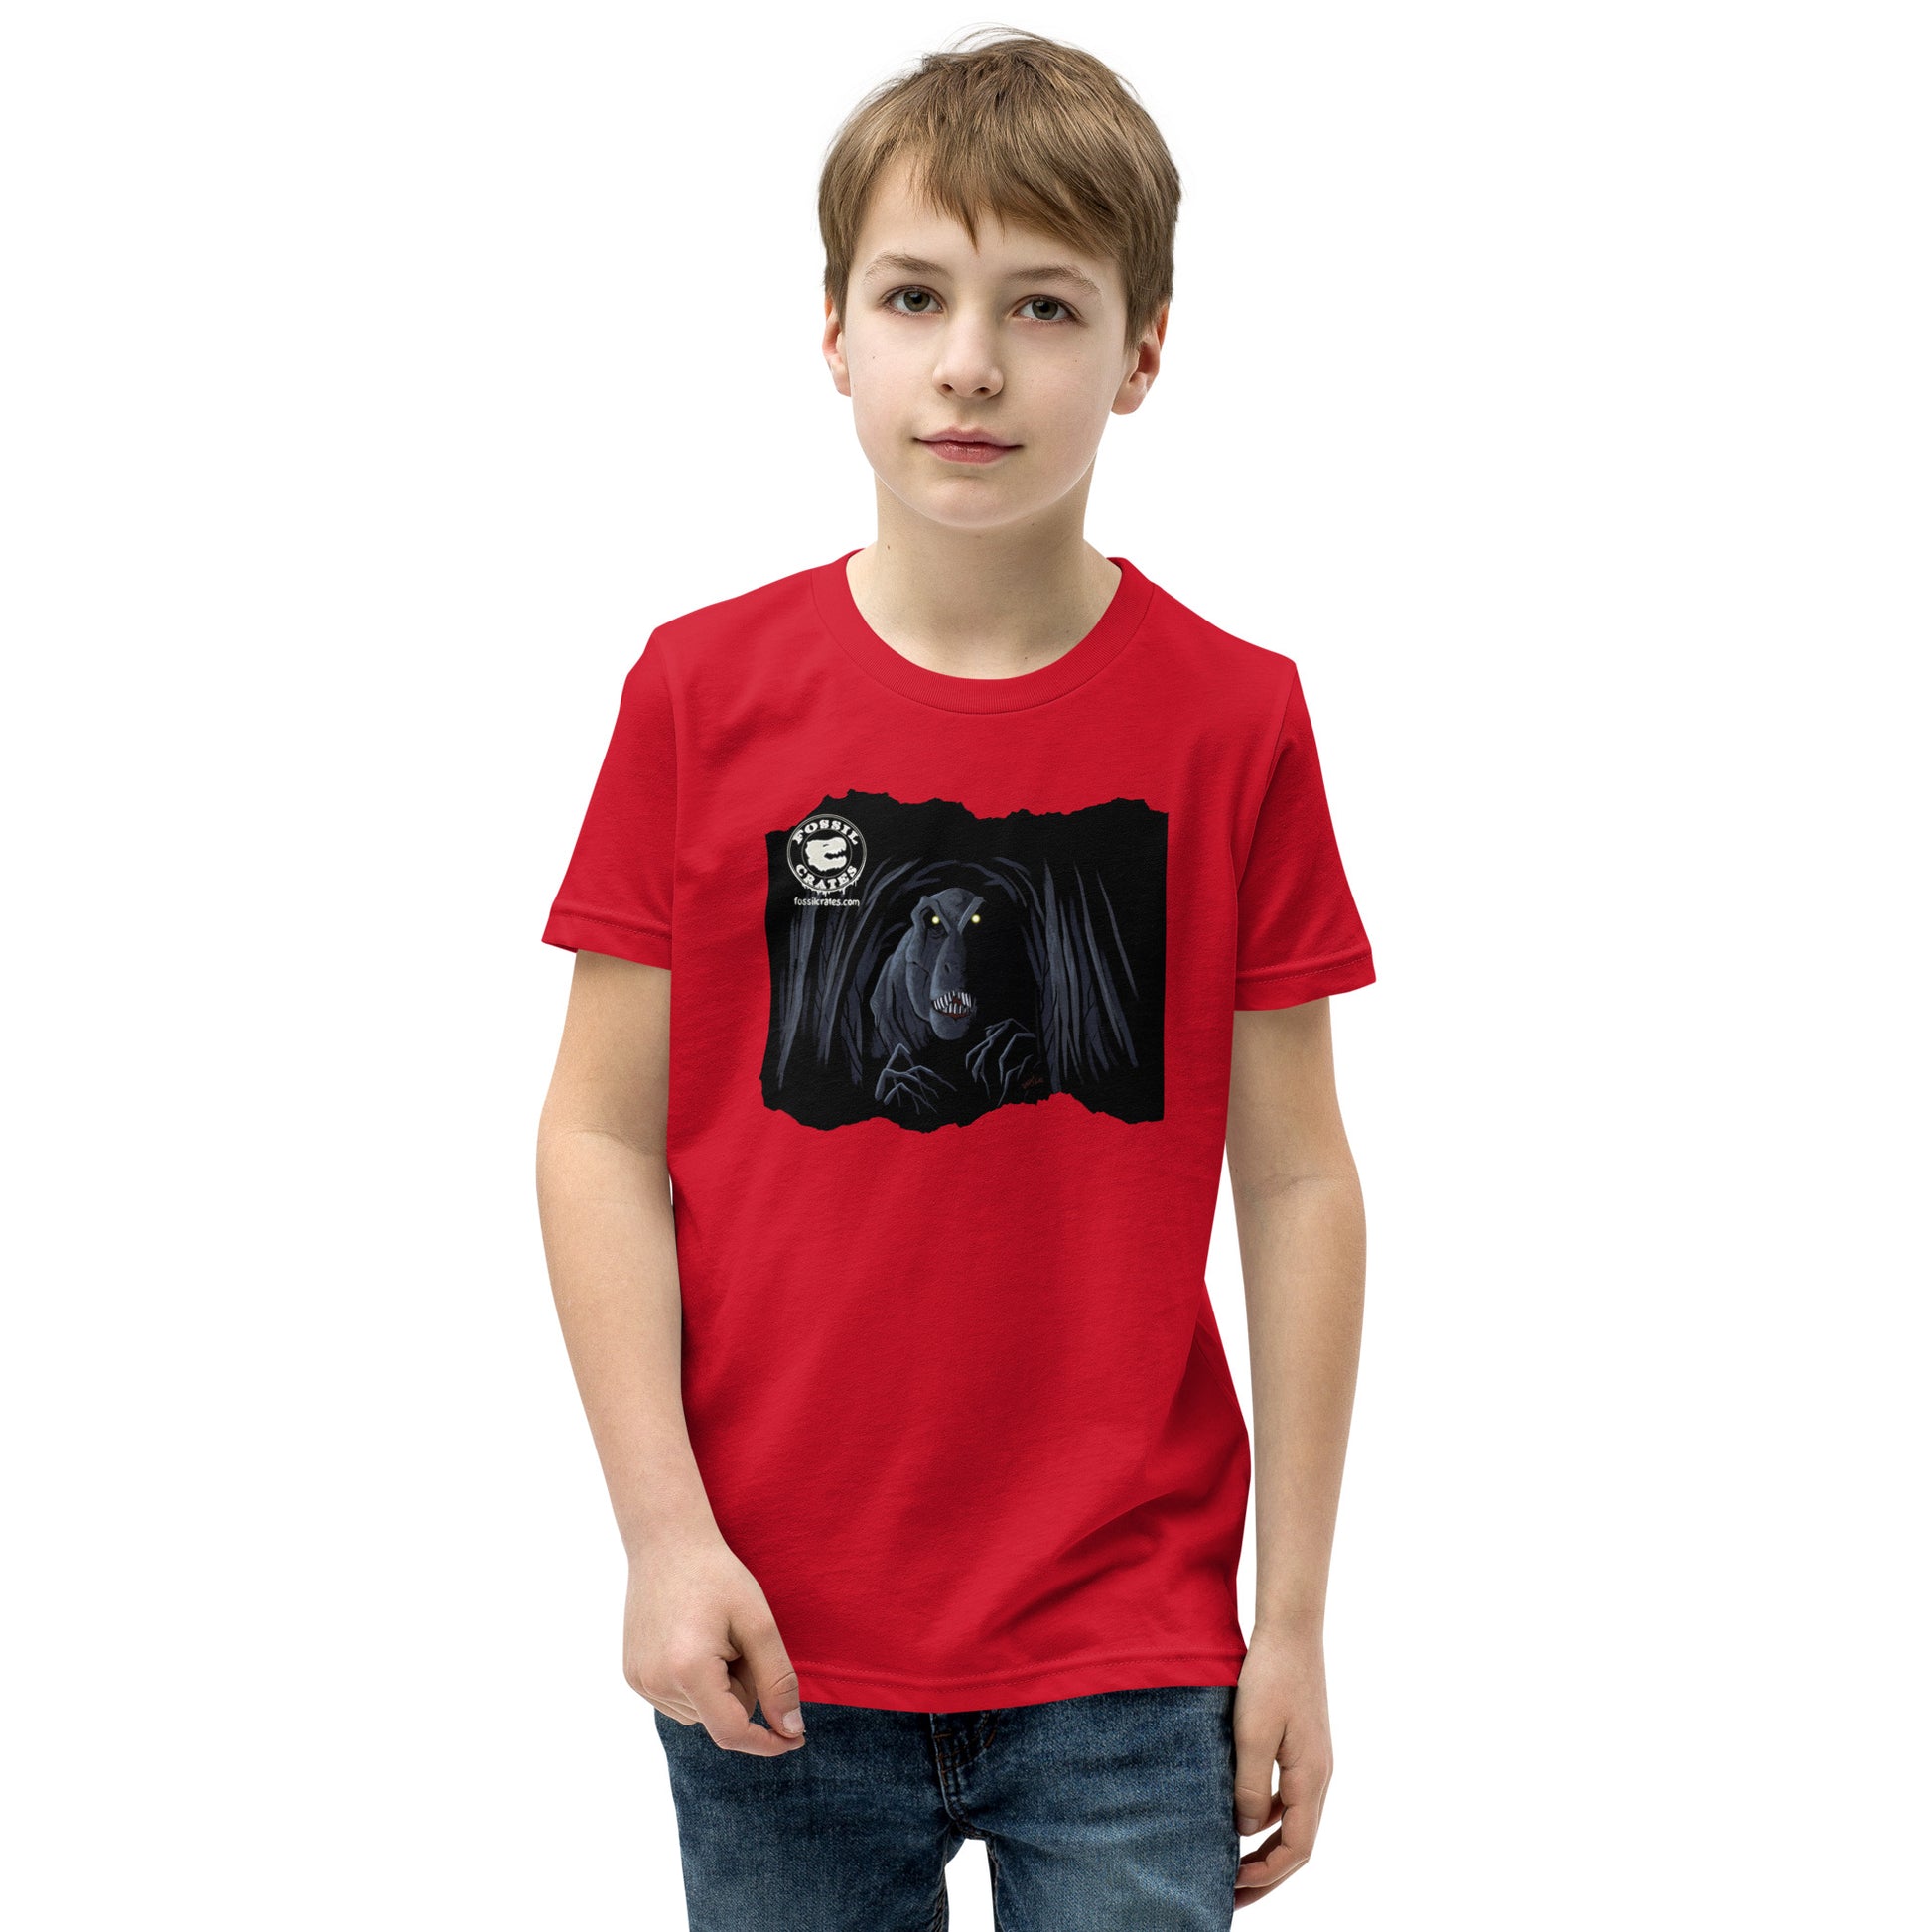 Spooky T. rex Youth T-Shirt in red